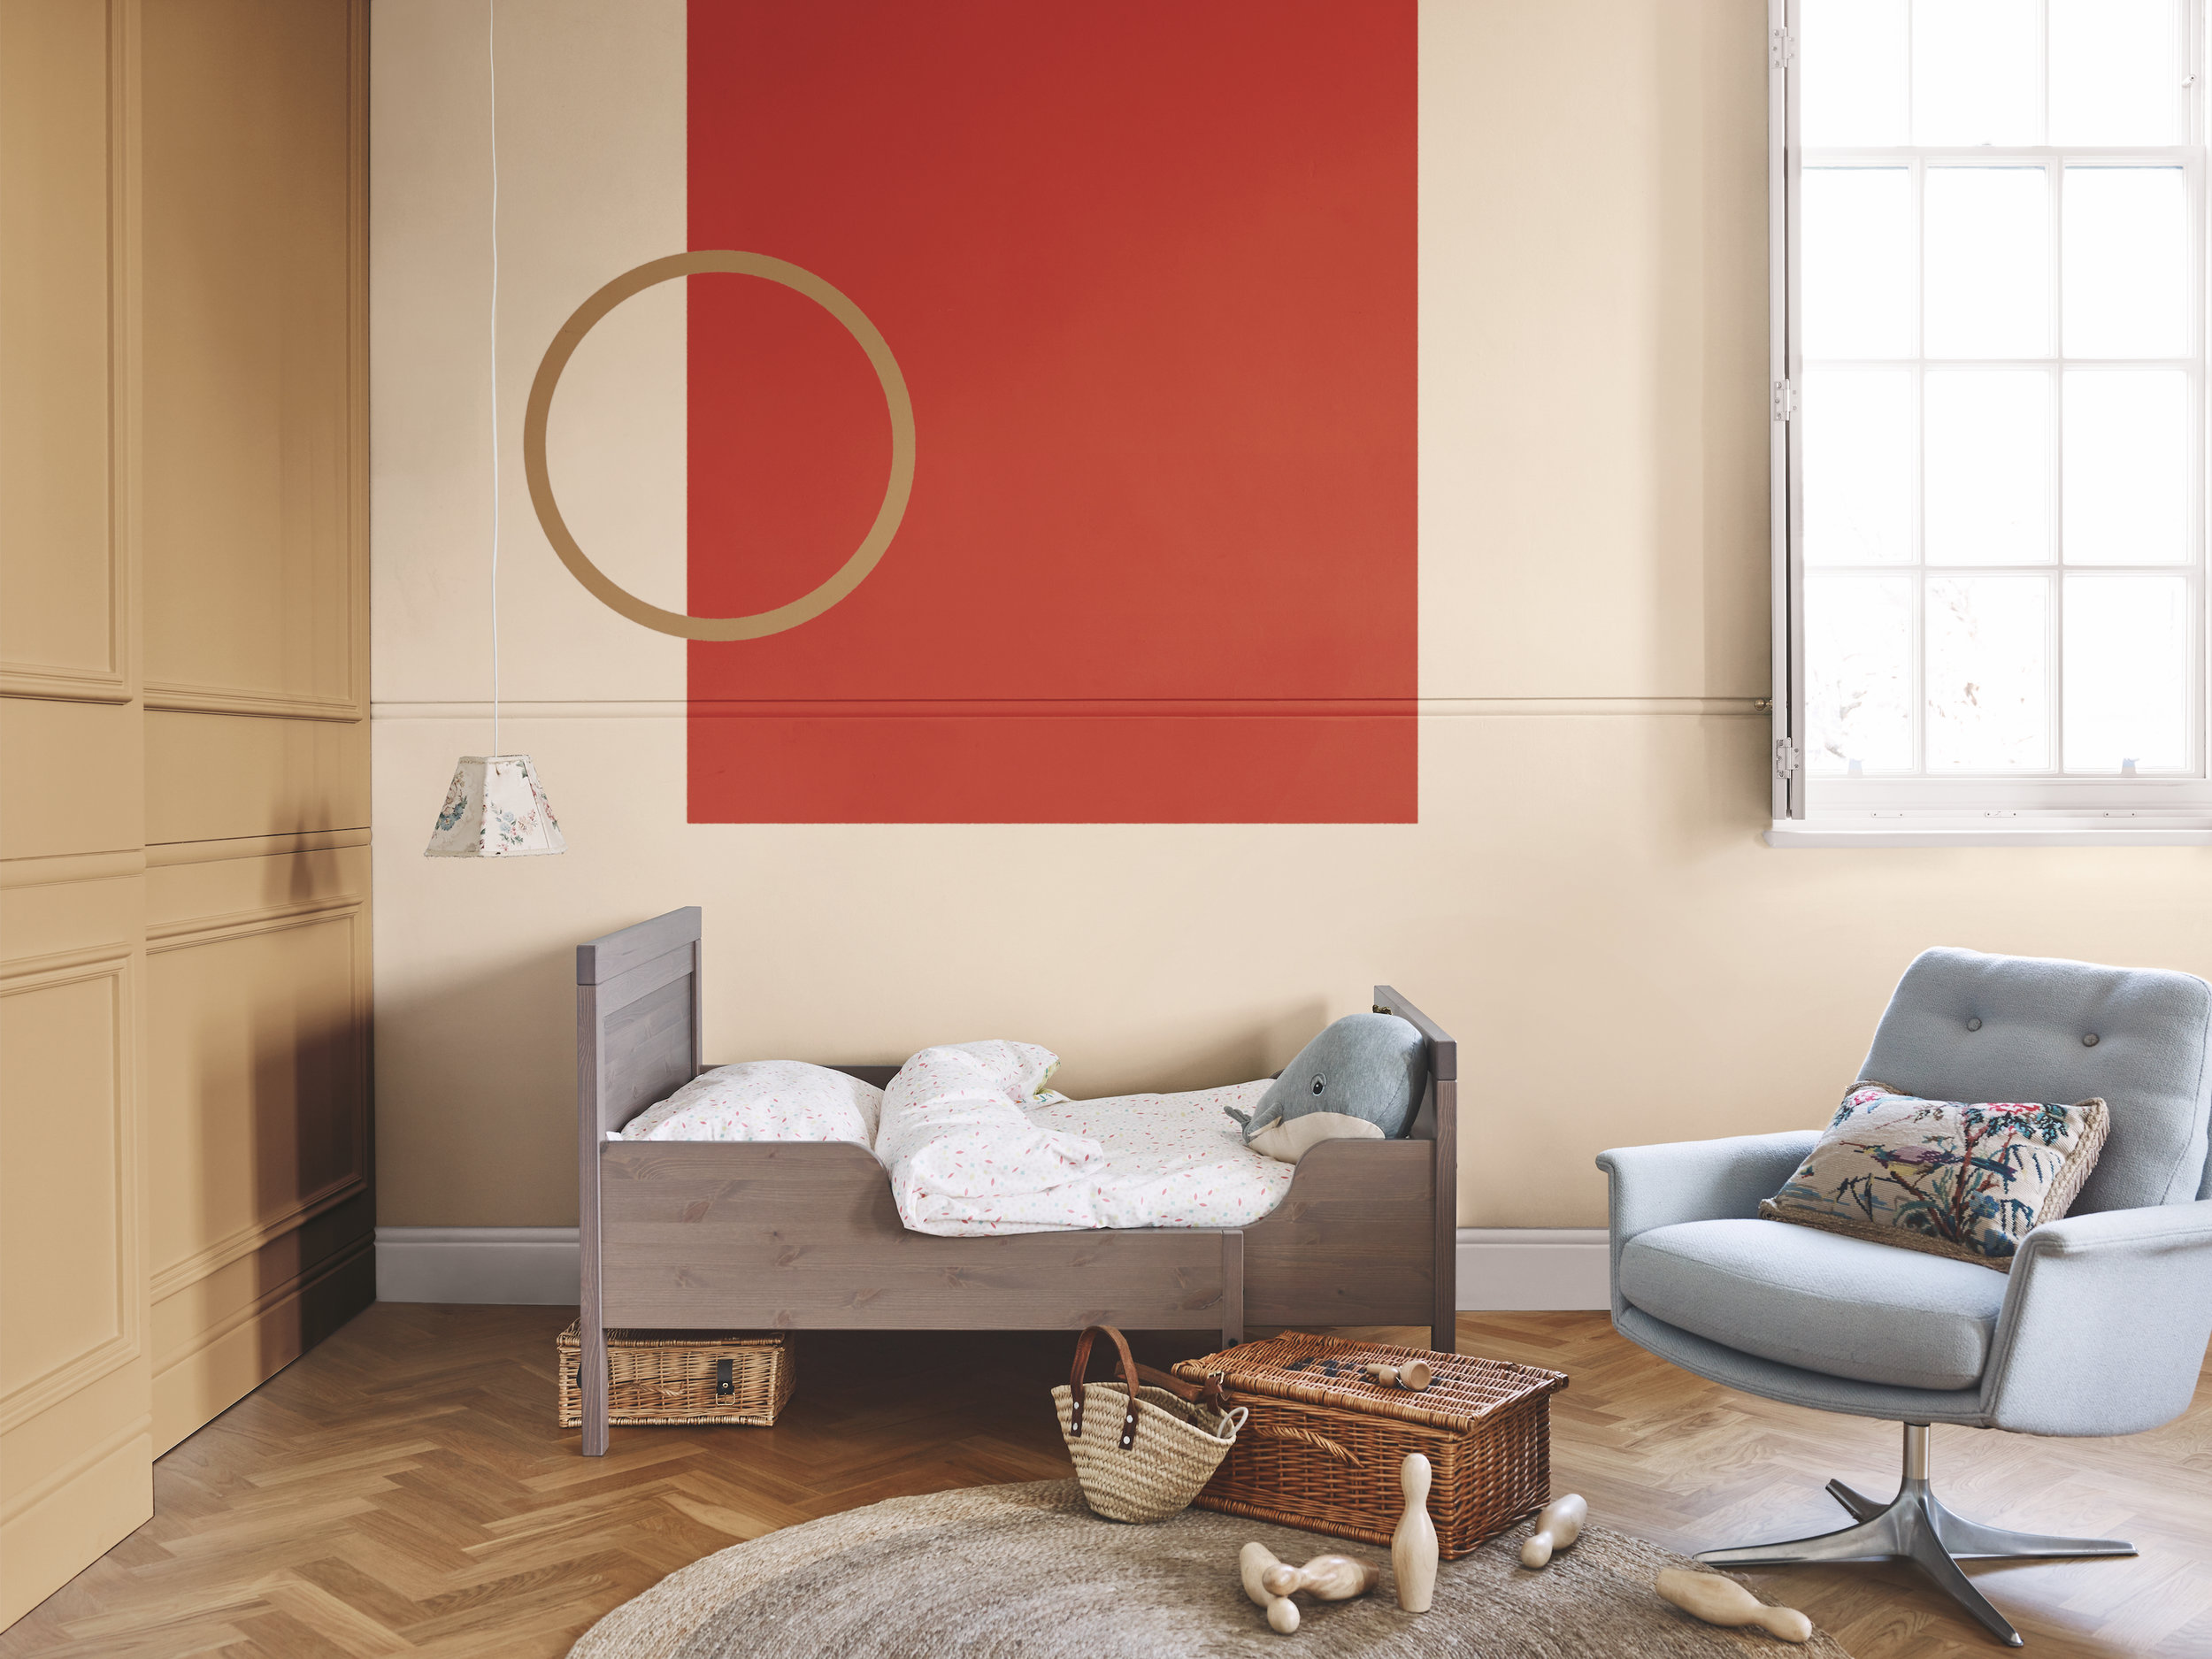 Dulux-Colour-Futures-Colour-of-the-Year-2019-A-place-to-love-Kidsroom-Inspiration-Global-BC-08C.jpg